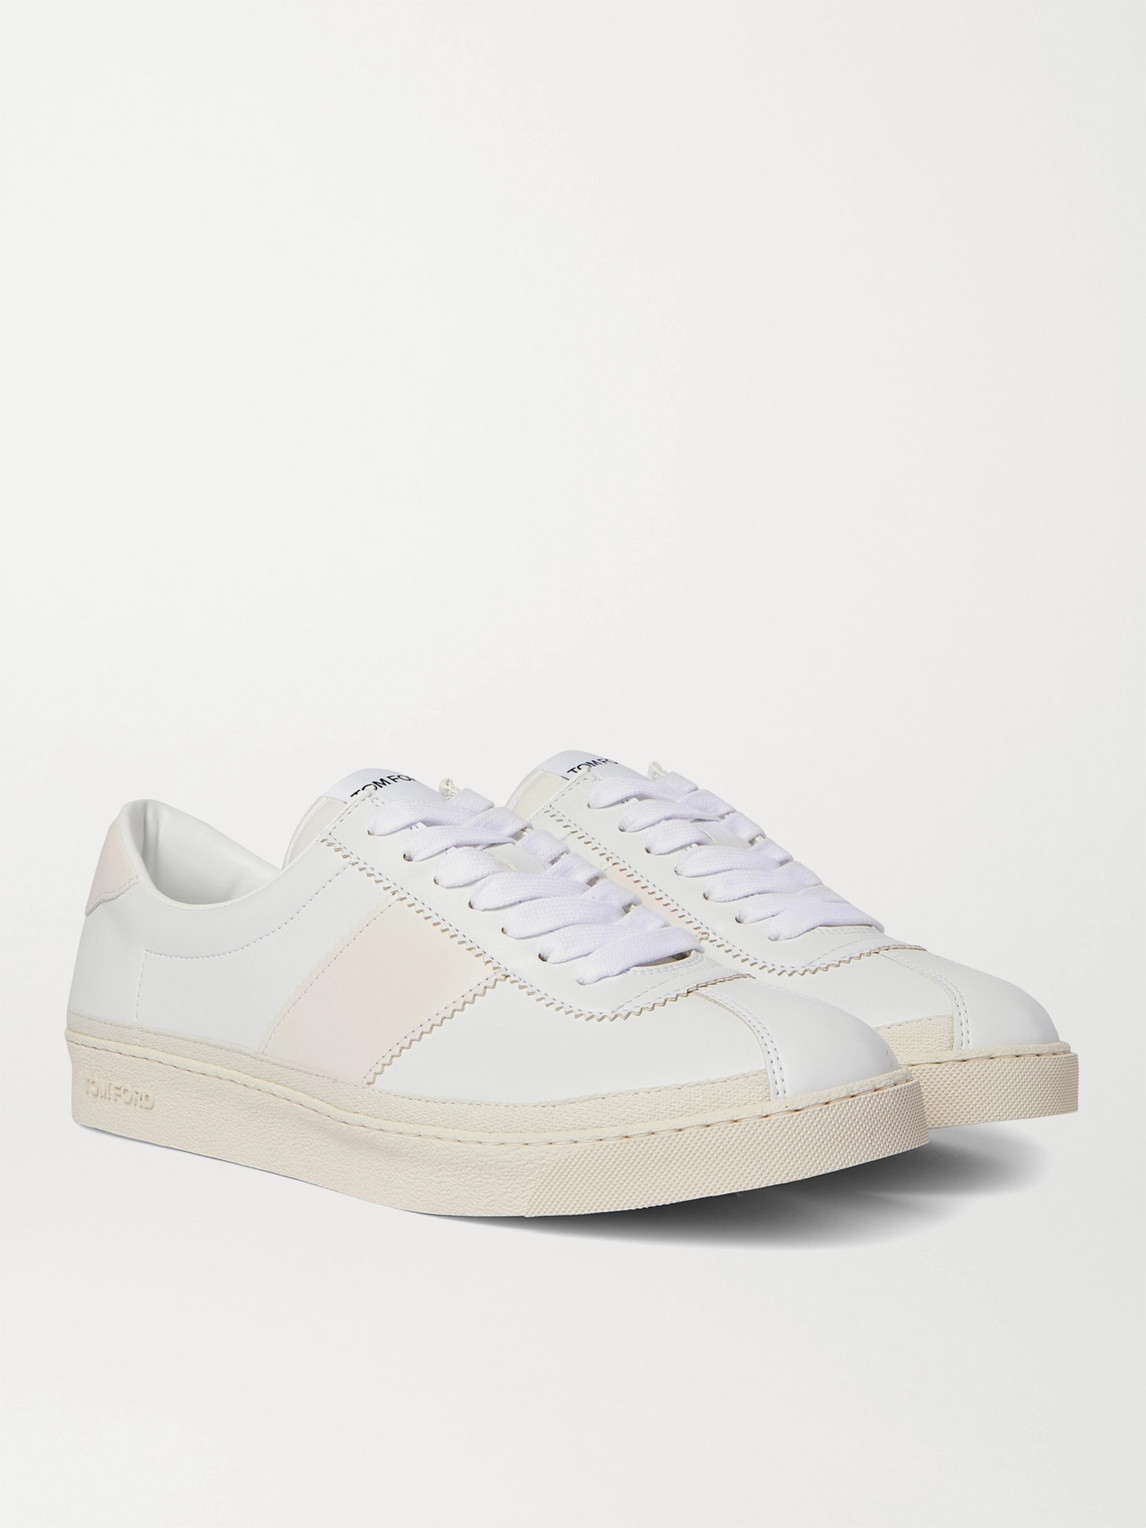 Tom Ford Bannister Panelled Faux Leather Sneakers In White